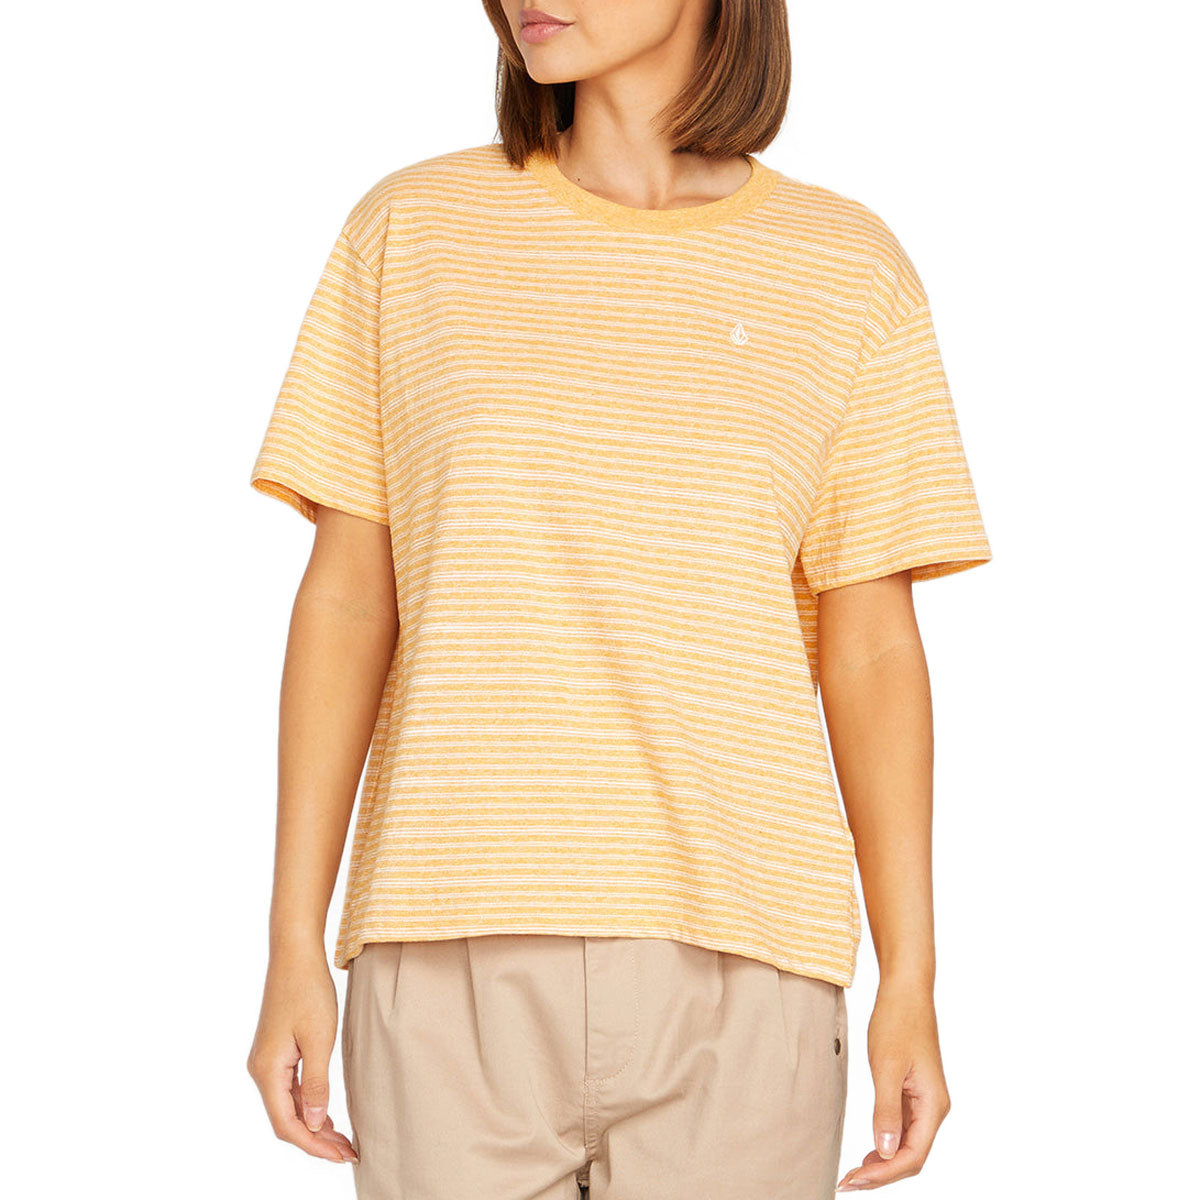 Volcom Womens Party Pack Shirt - Vintage Gold image 1